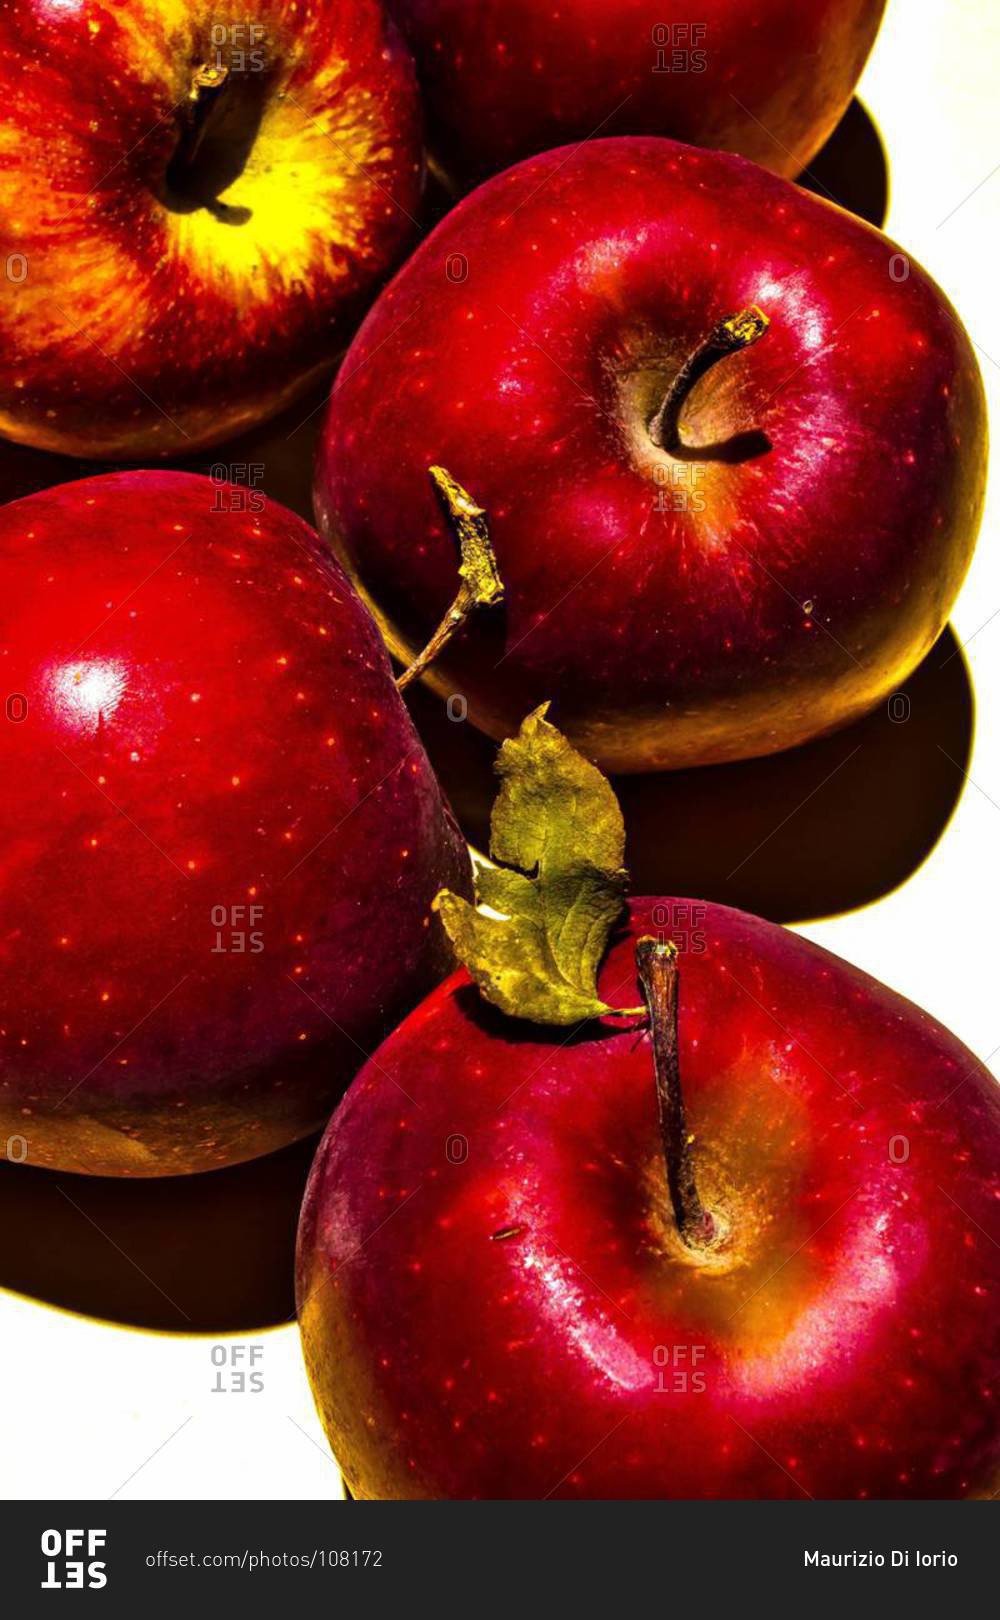 Five red apples